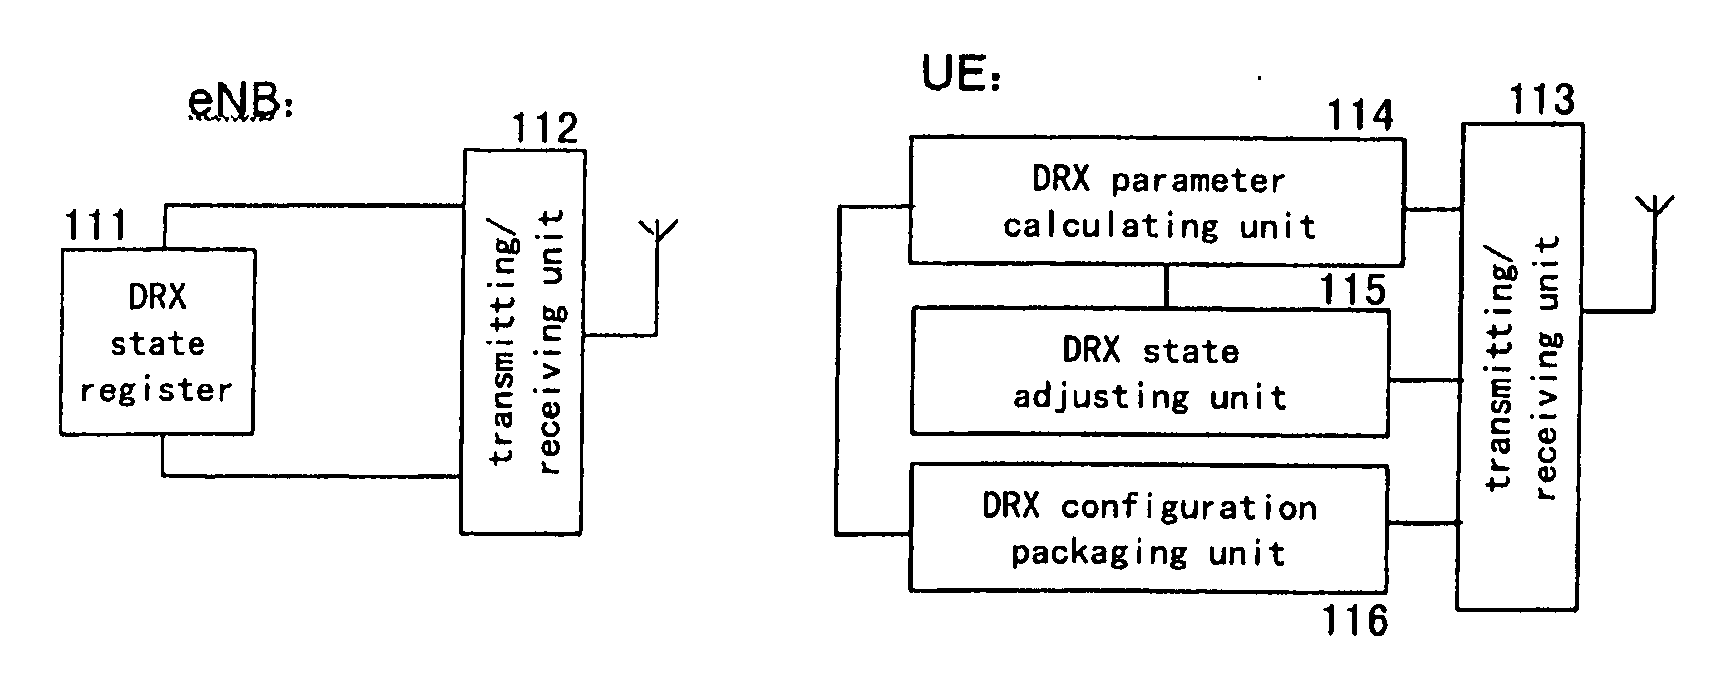 Method and apparatus for setting active period starting point for user equipment